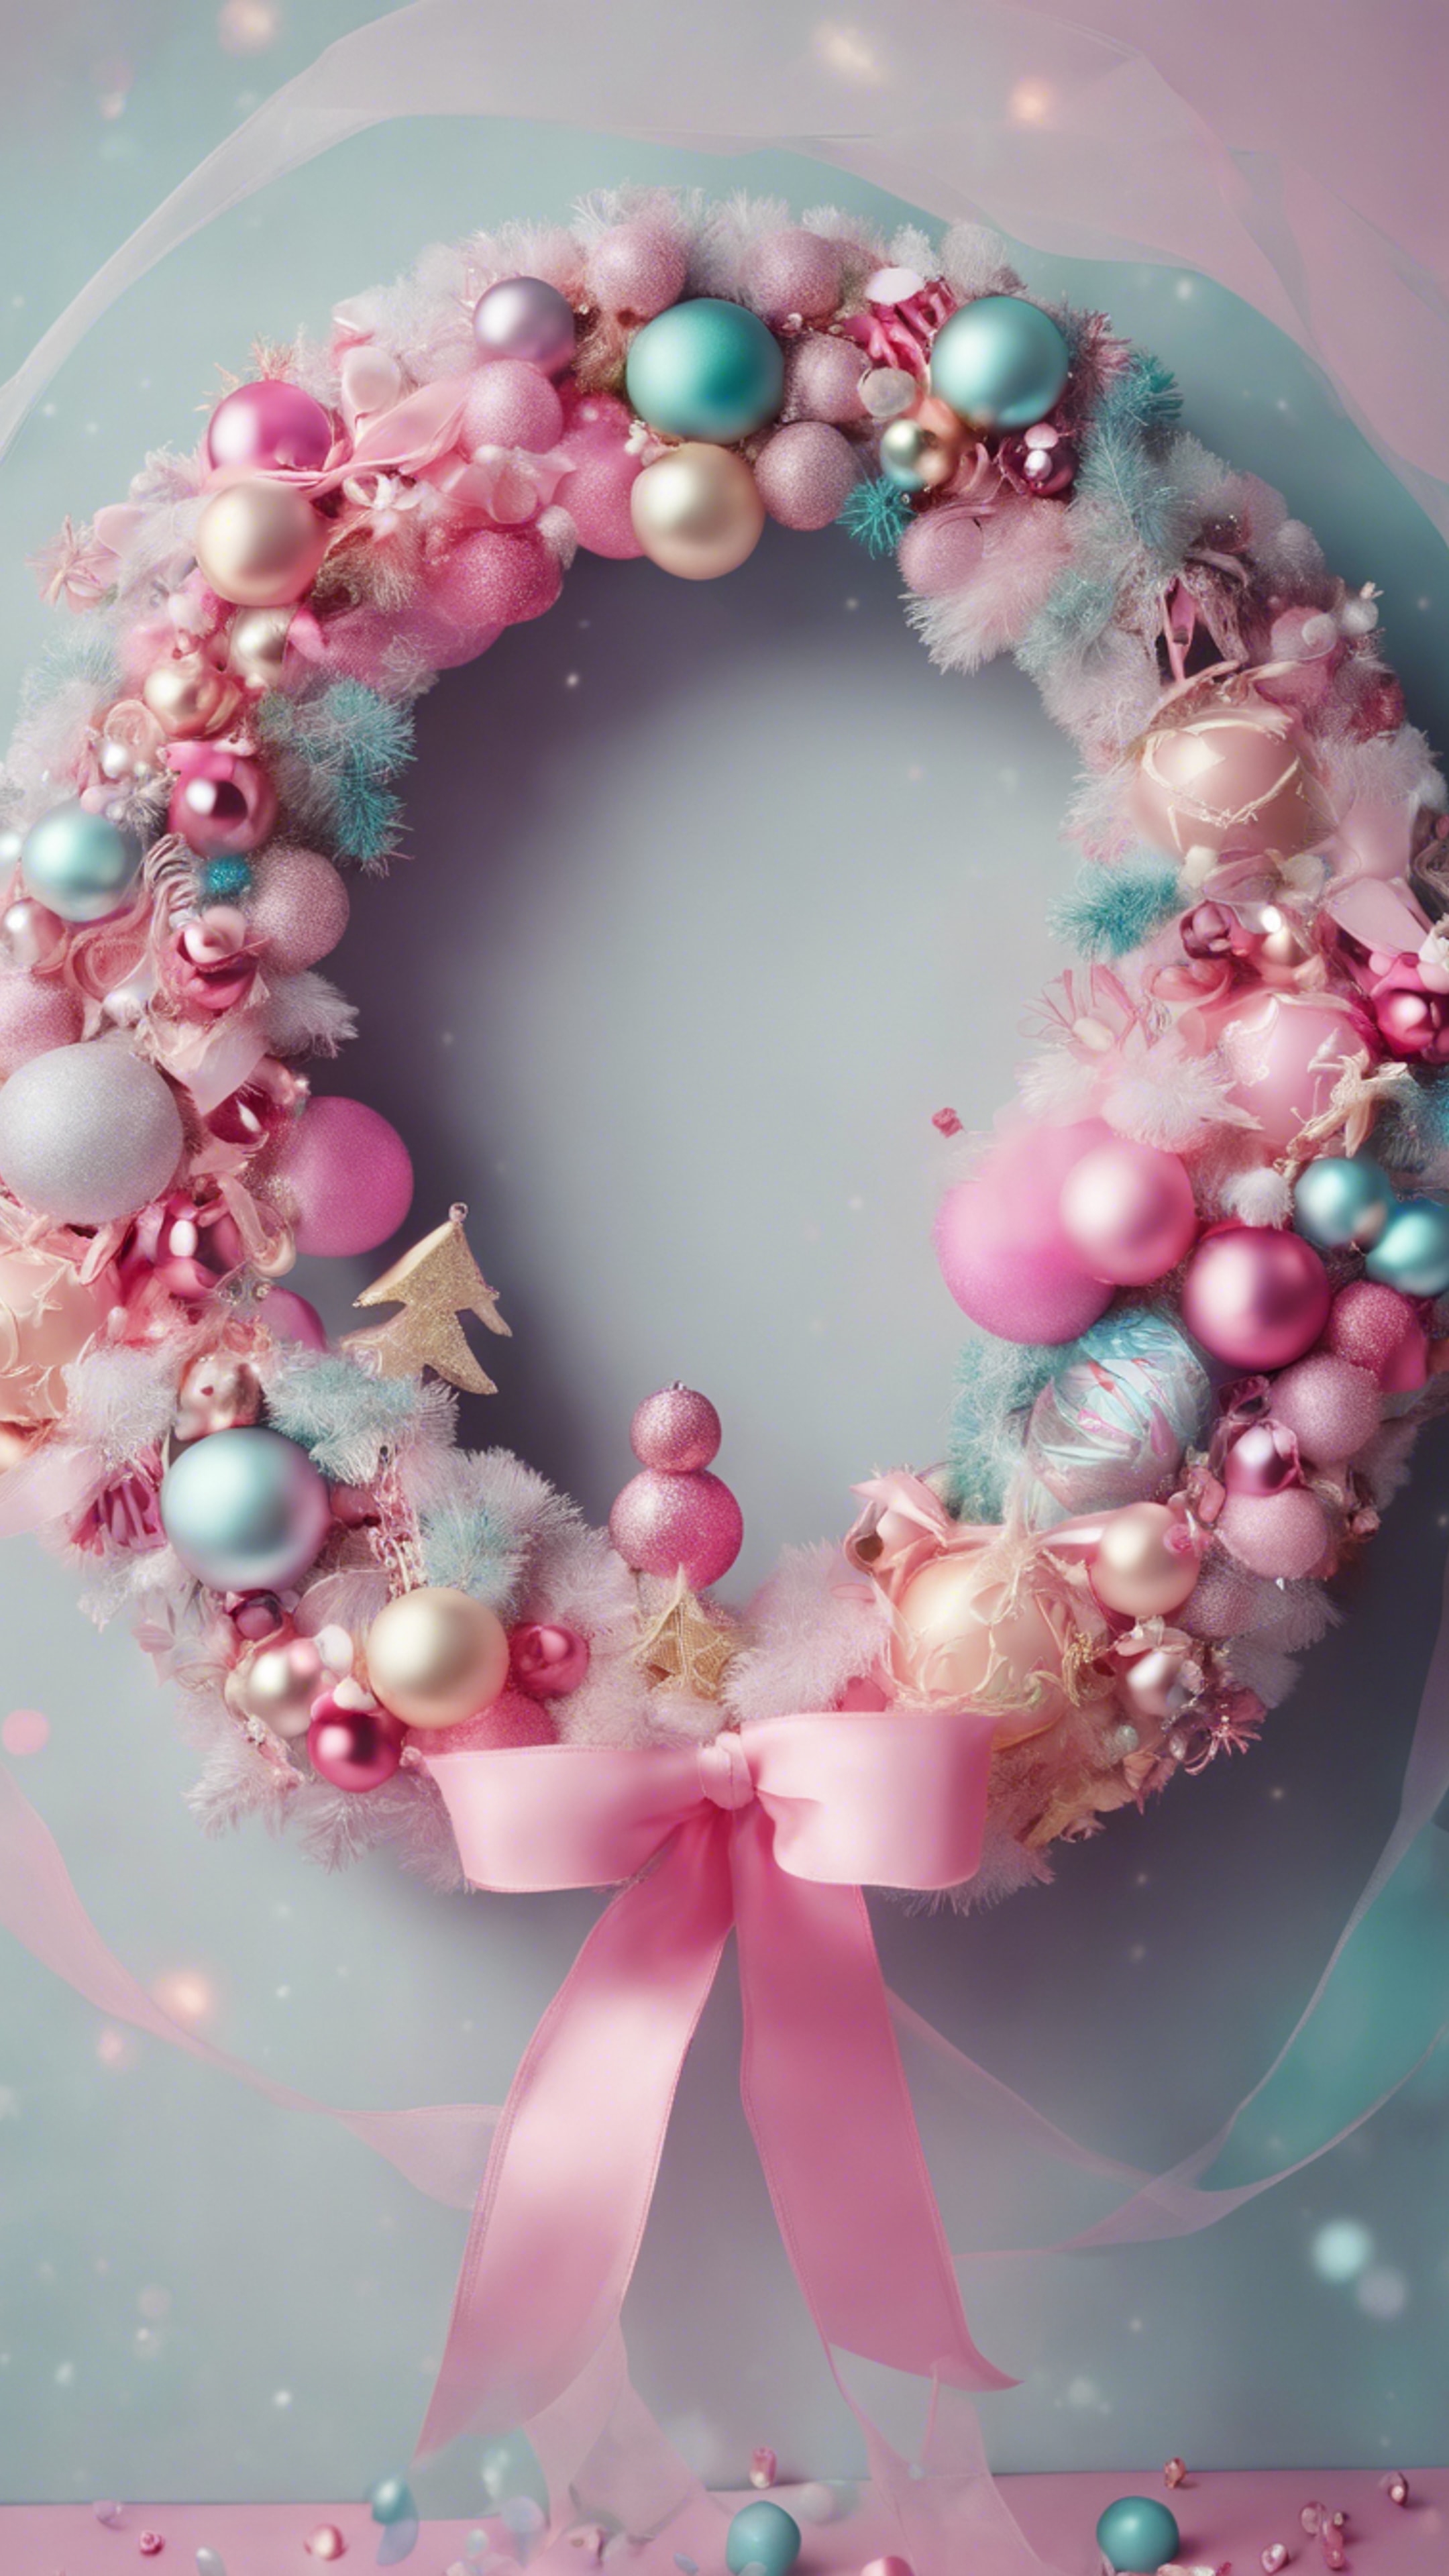 A Kawaii-inspired Christmas wreath adorned with bright pink and pastel ribbons and cute festive ornaments. Kertas dinding[4ef6f99b659d4f218ce6]